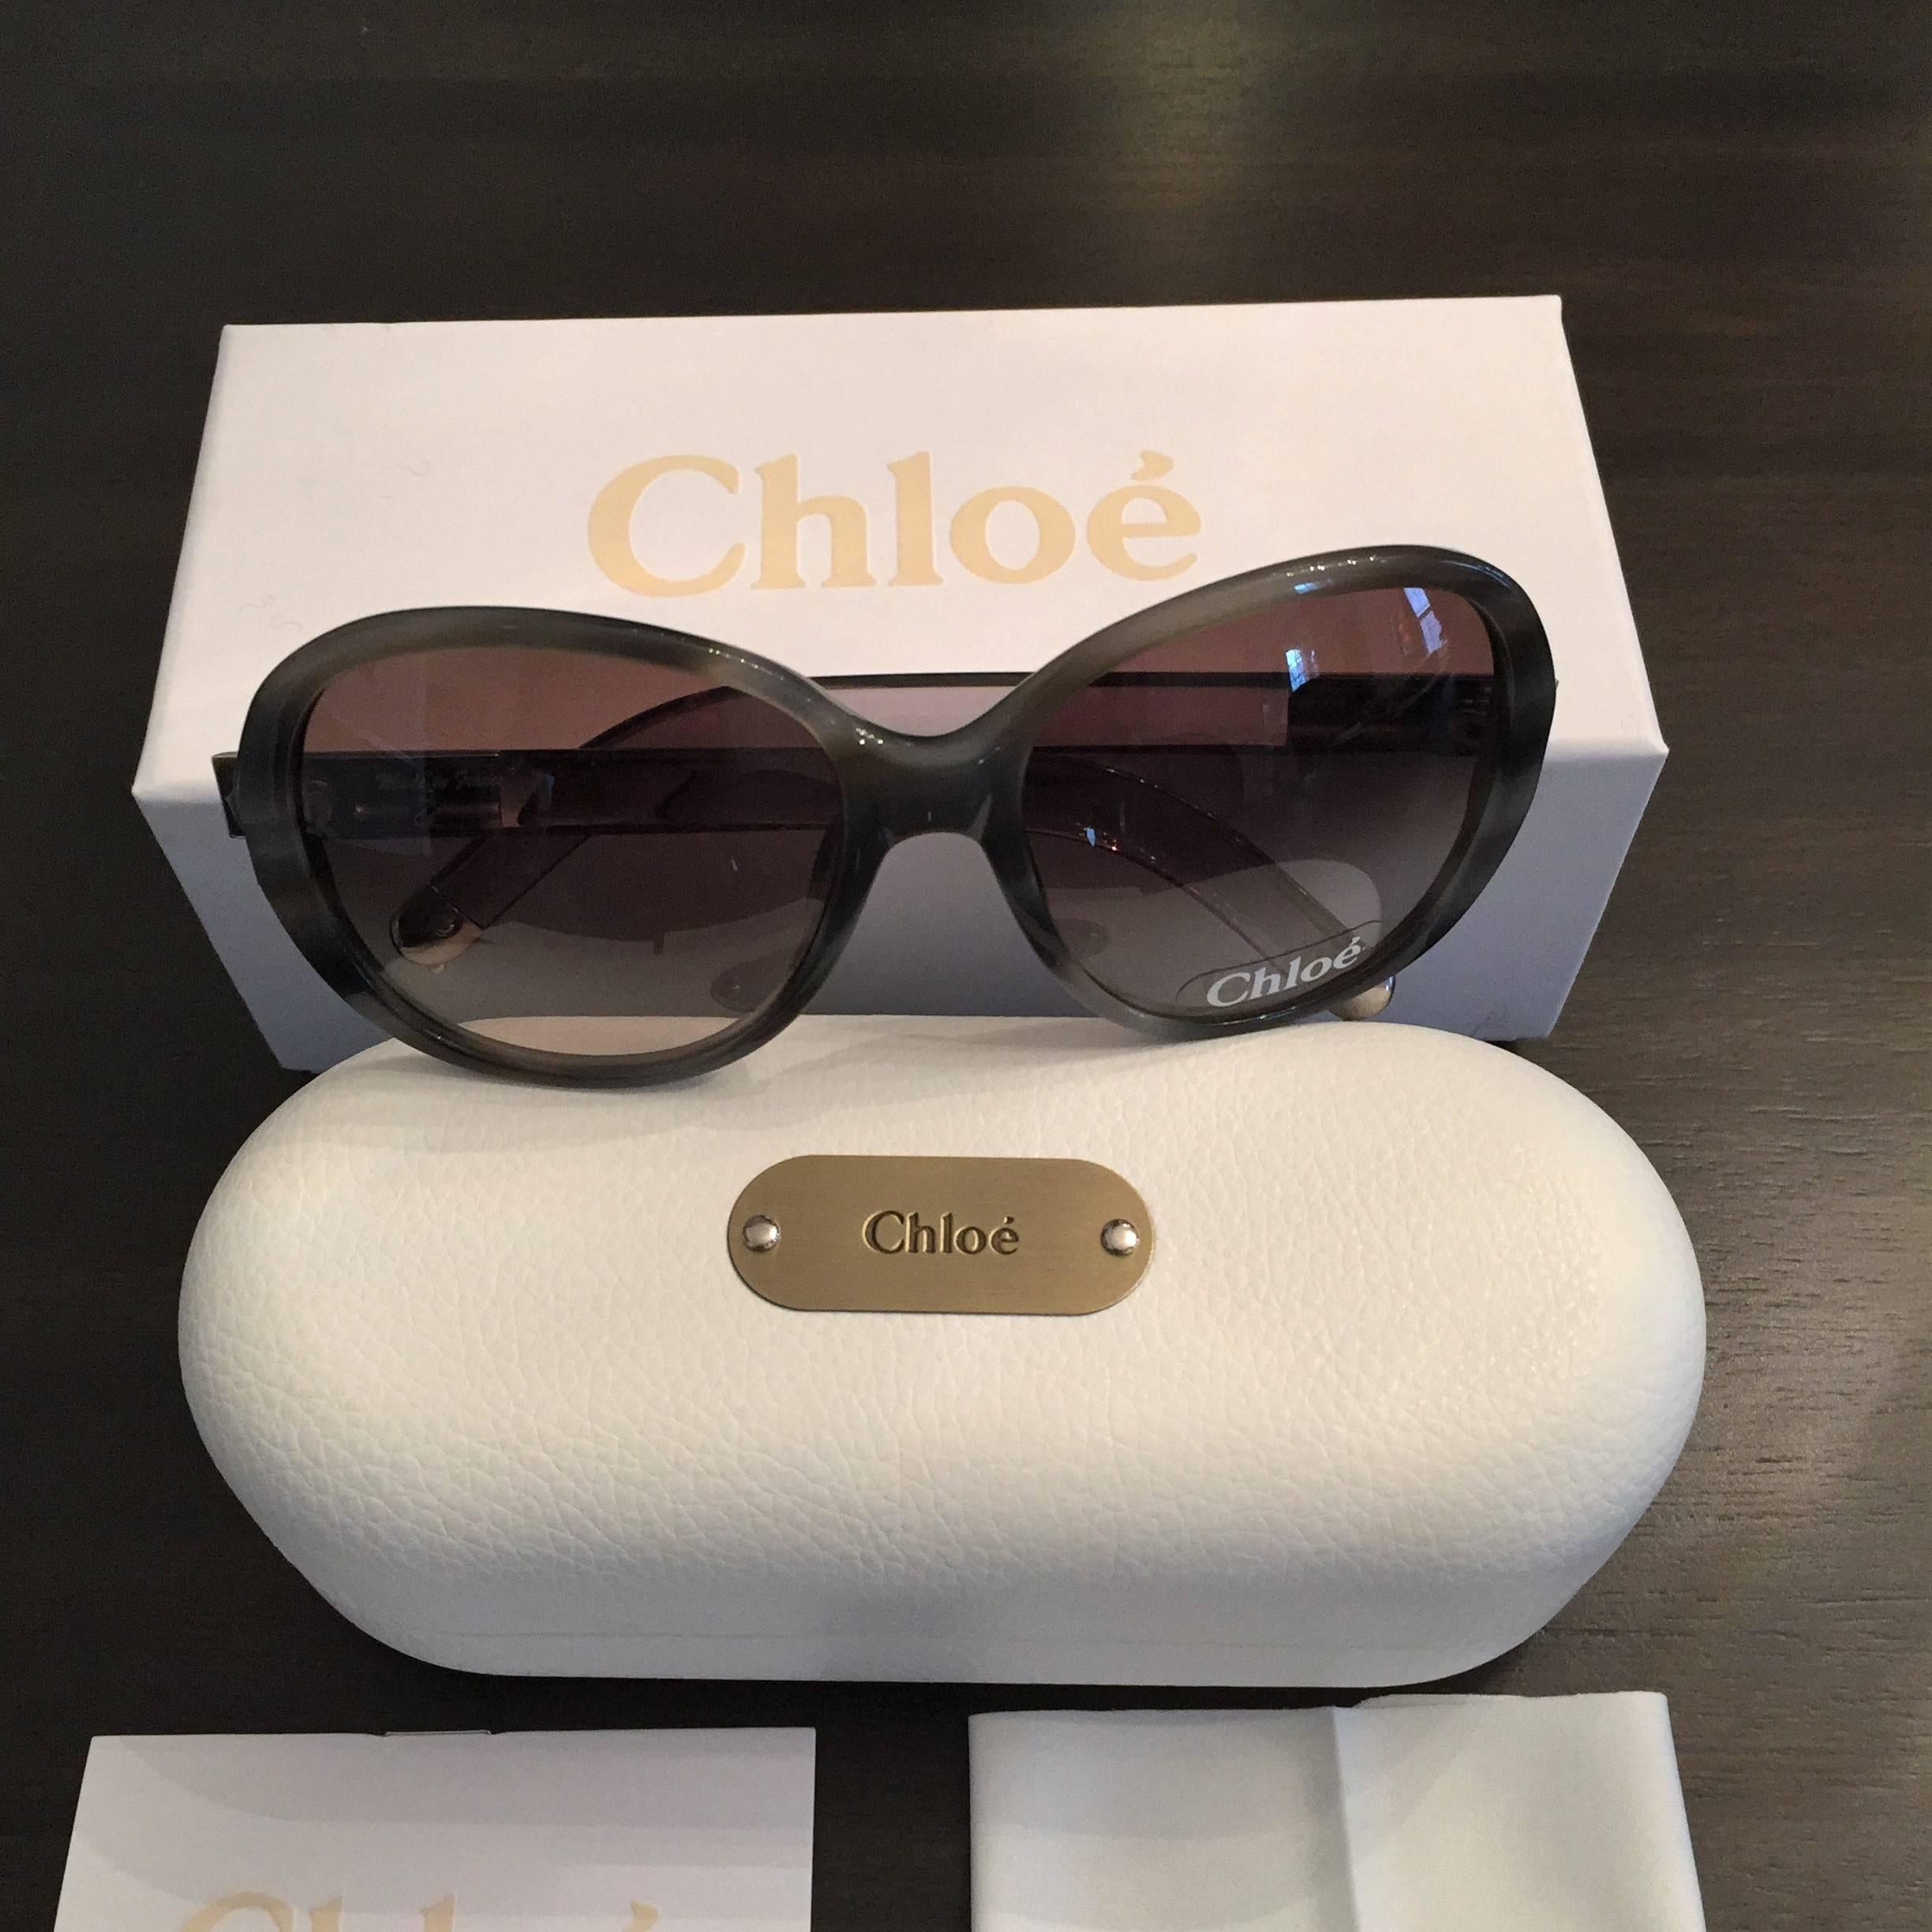 New Chloe Horn Tortoise Sunglasses With Lucite With Case & Box 5